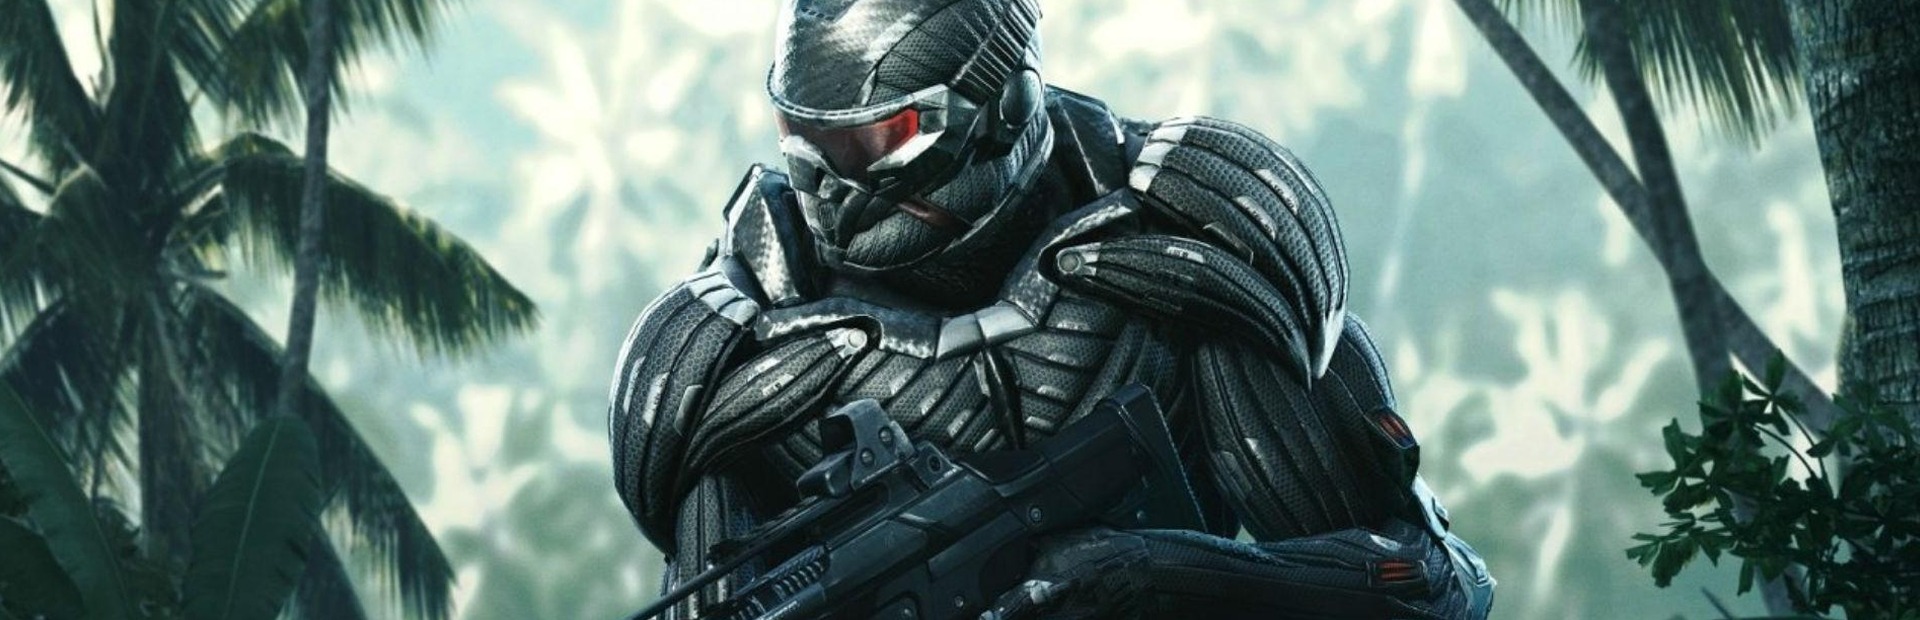 Crysis Remastered Trilogy Switch